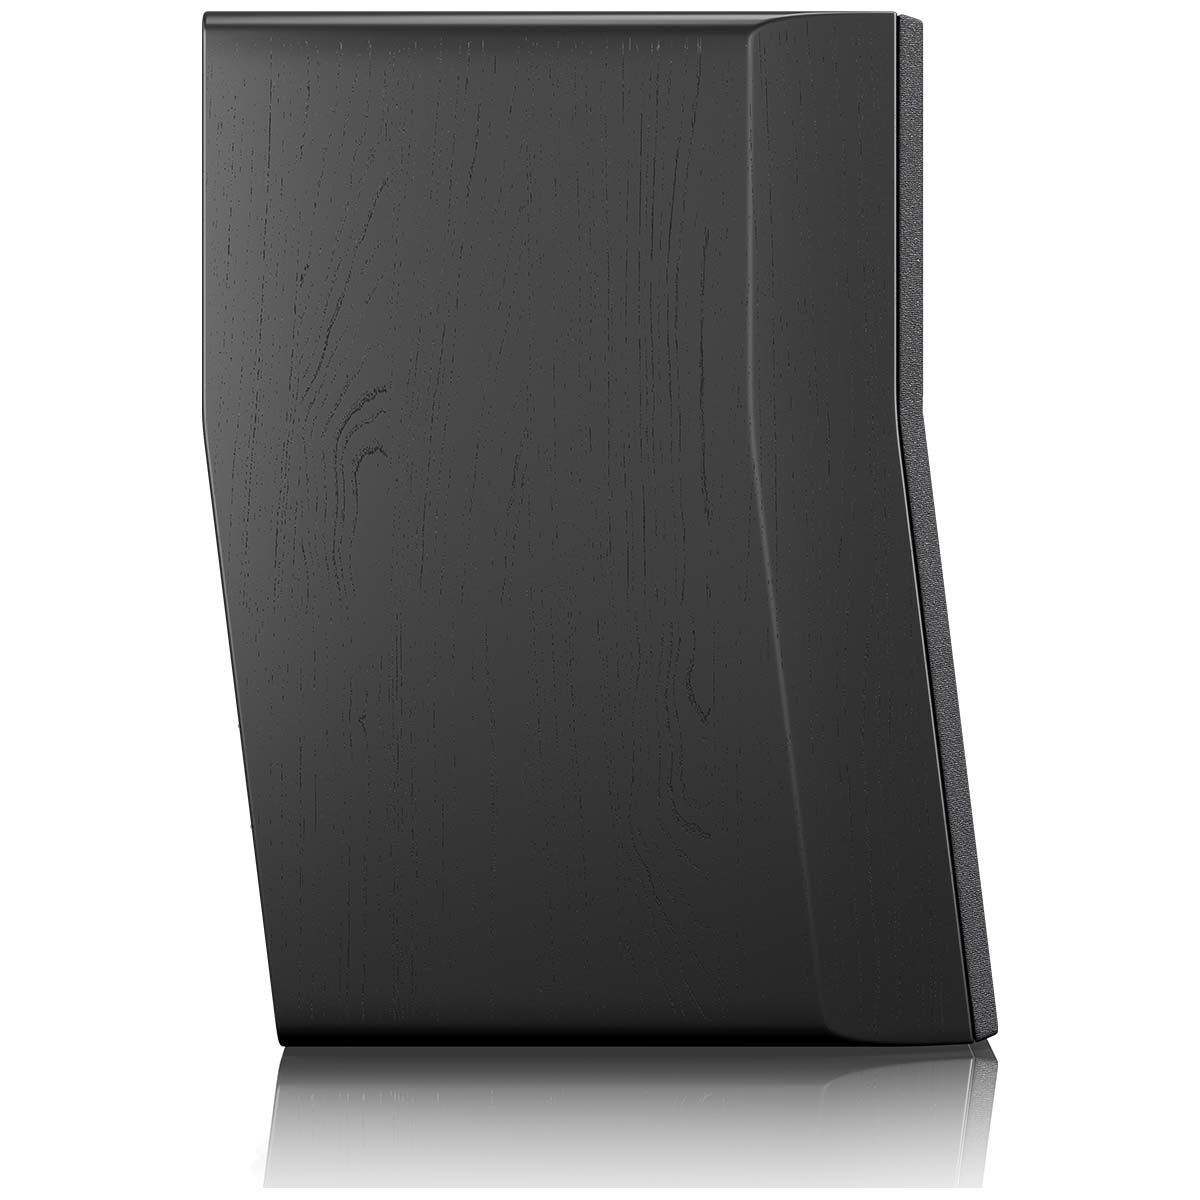 SVS Ultra Evolution Bookshelf Speaker - single black oak with grille - angled rear view without components